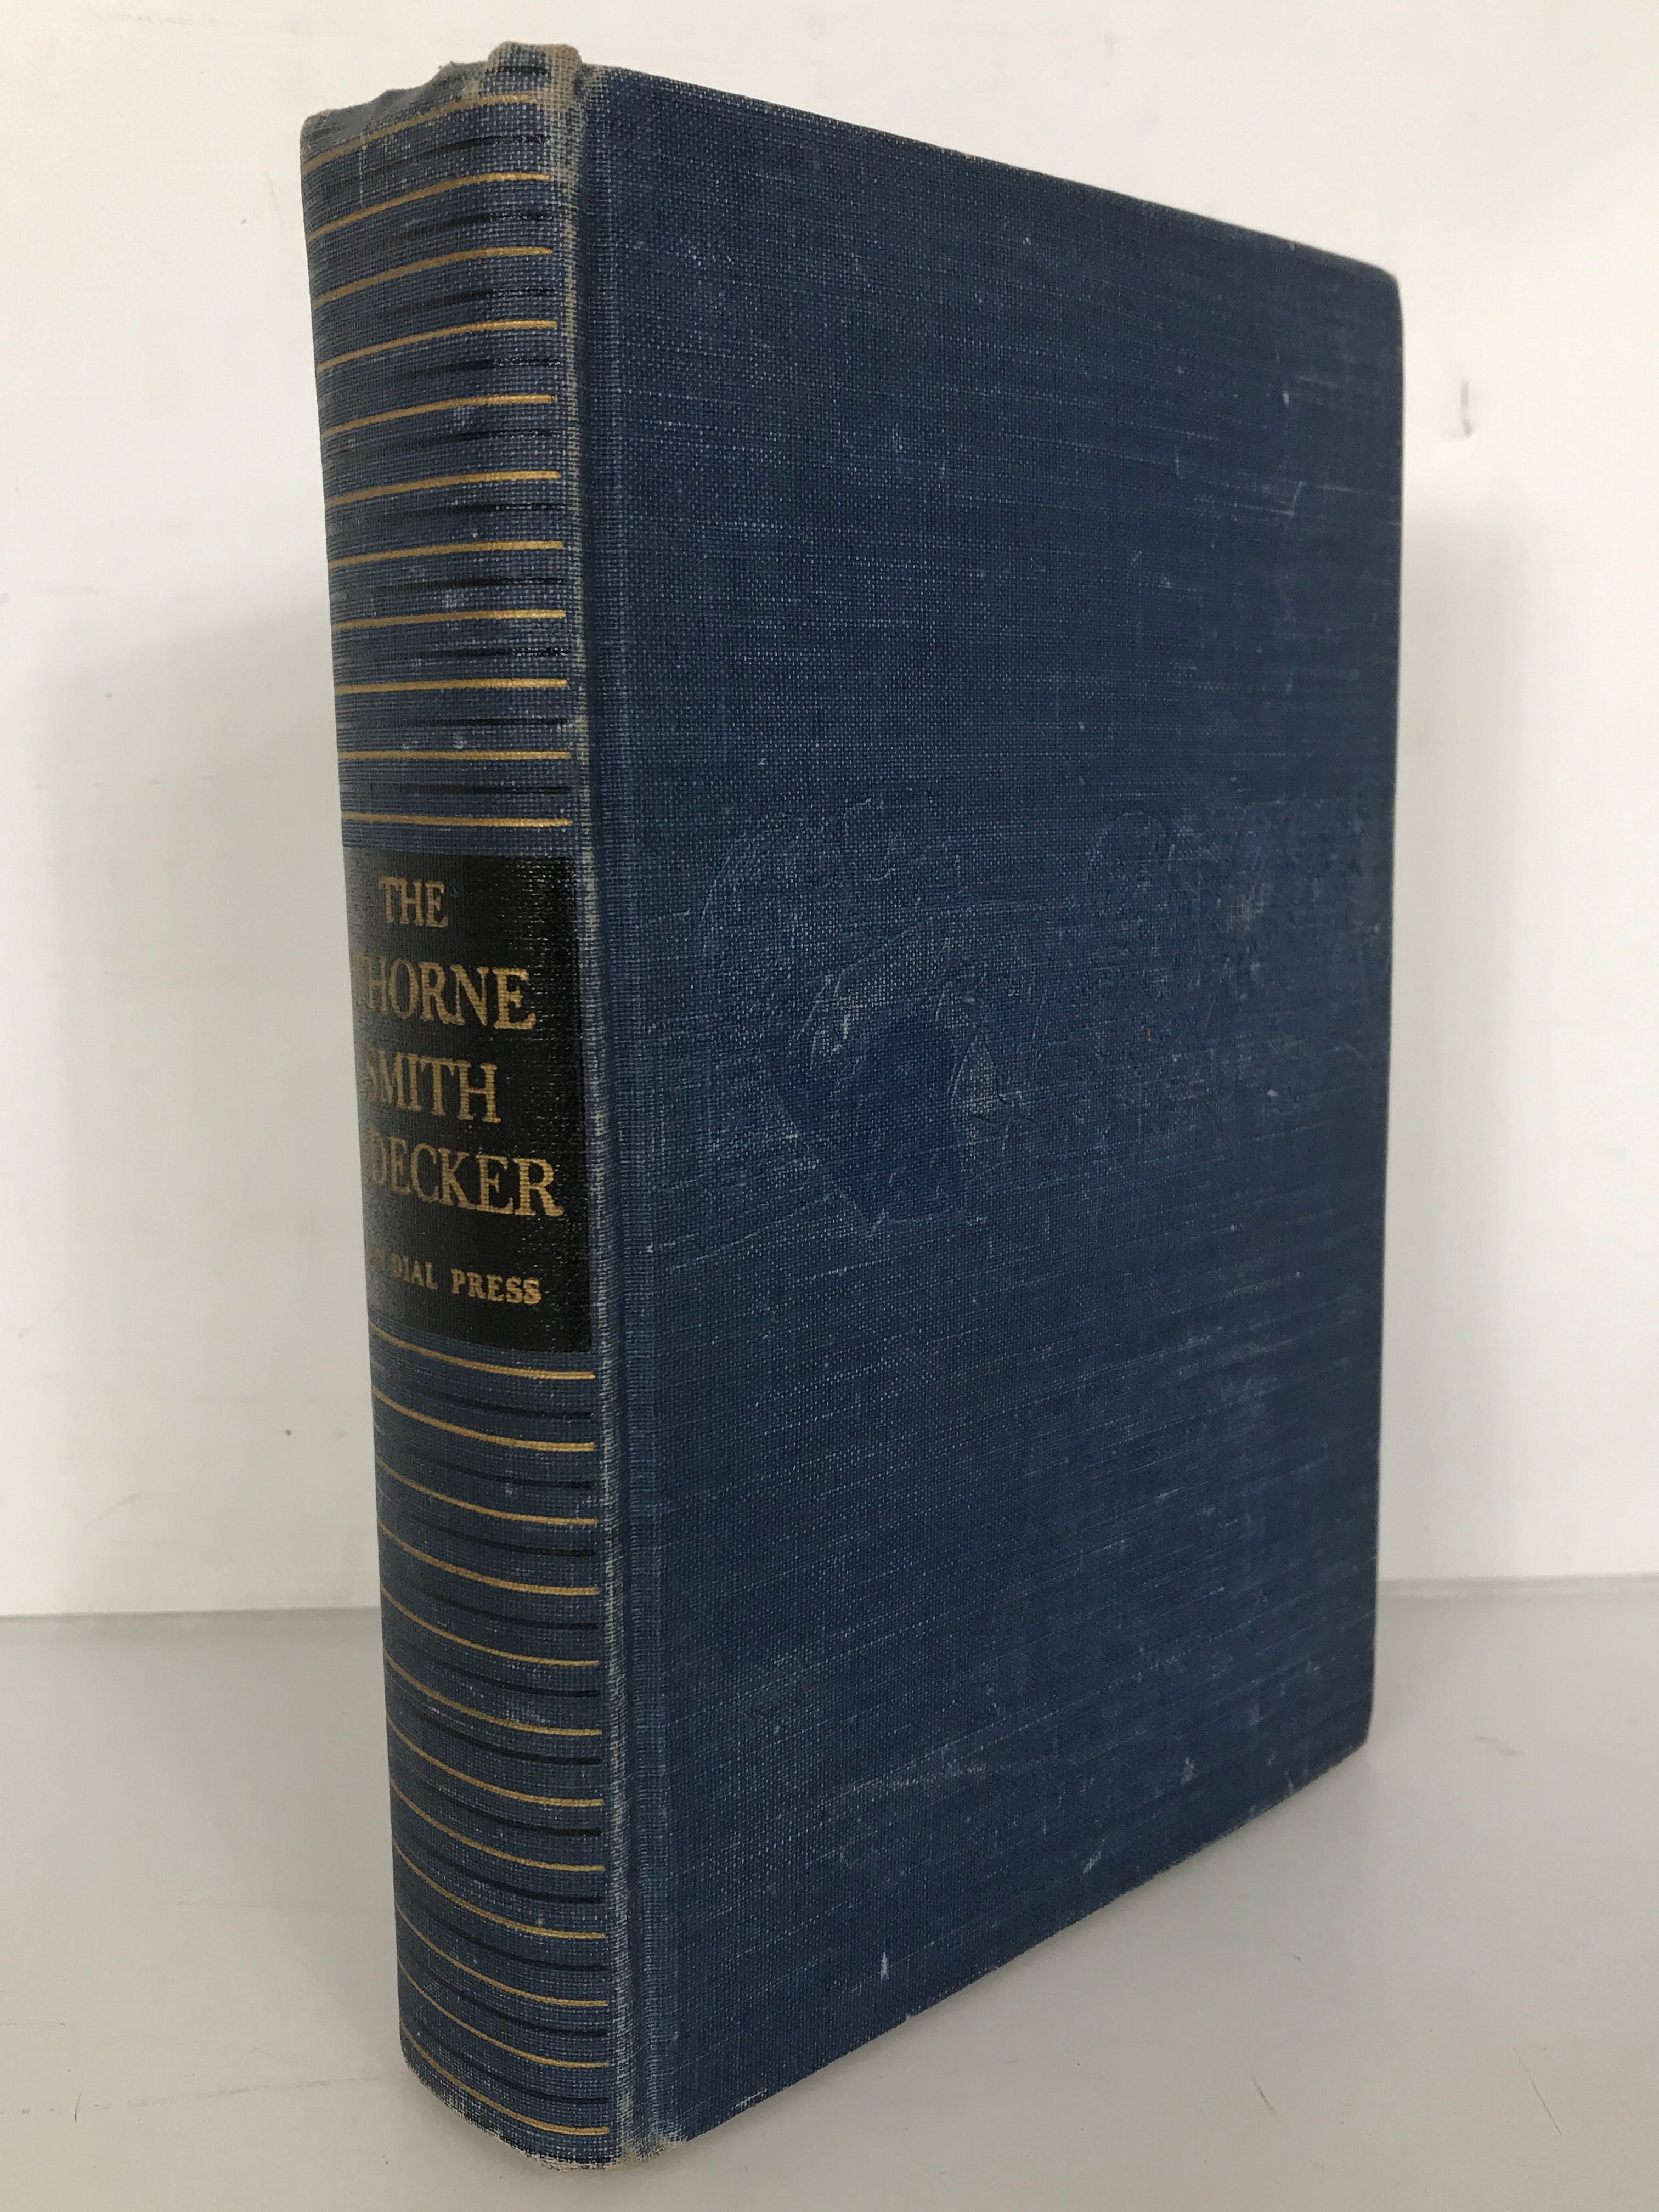 The Thorne Smith 3-Decker The Stray Lamb/Turnabout/Rain in the Doorway 1933 HC